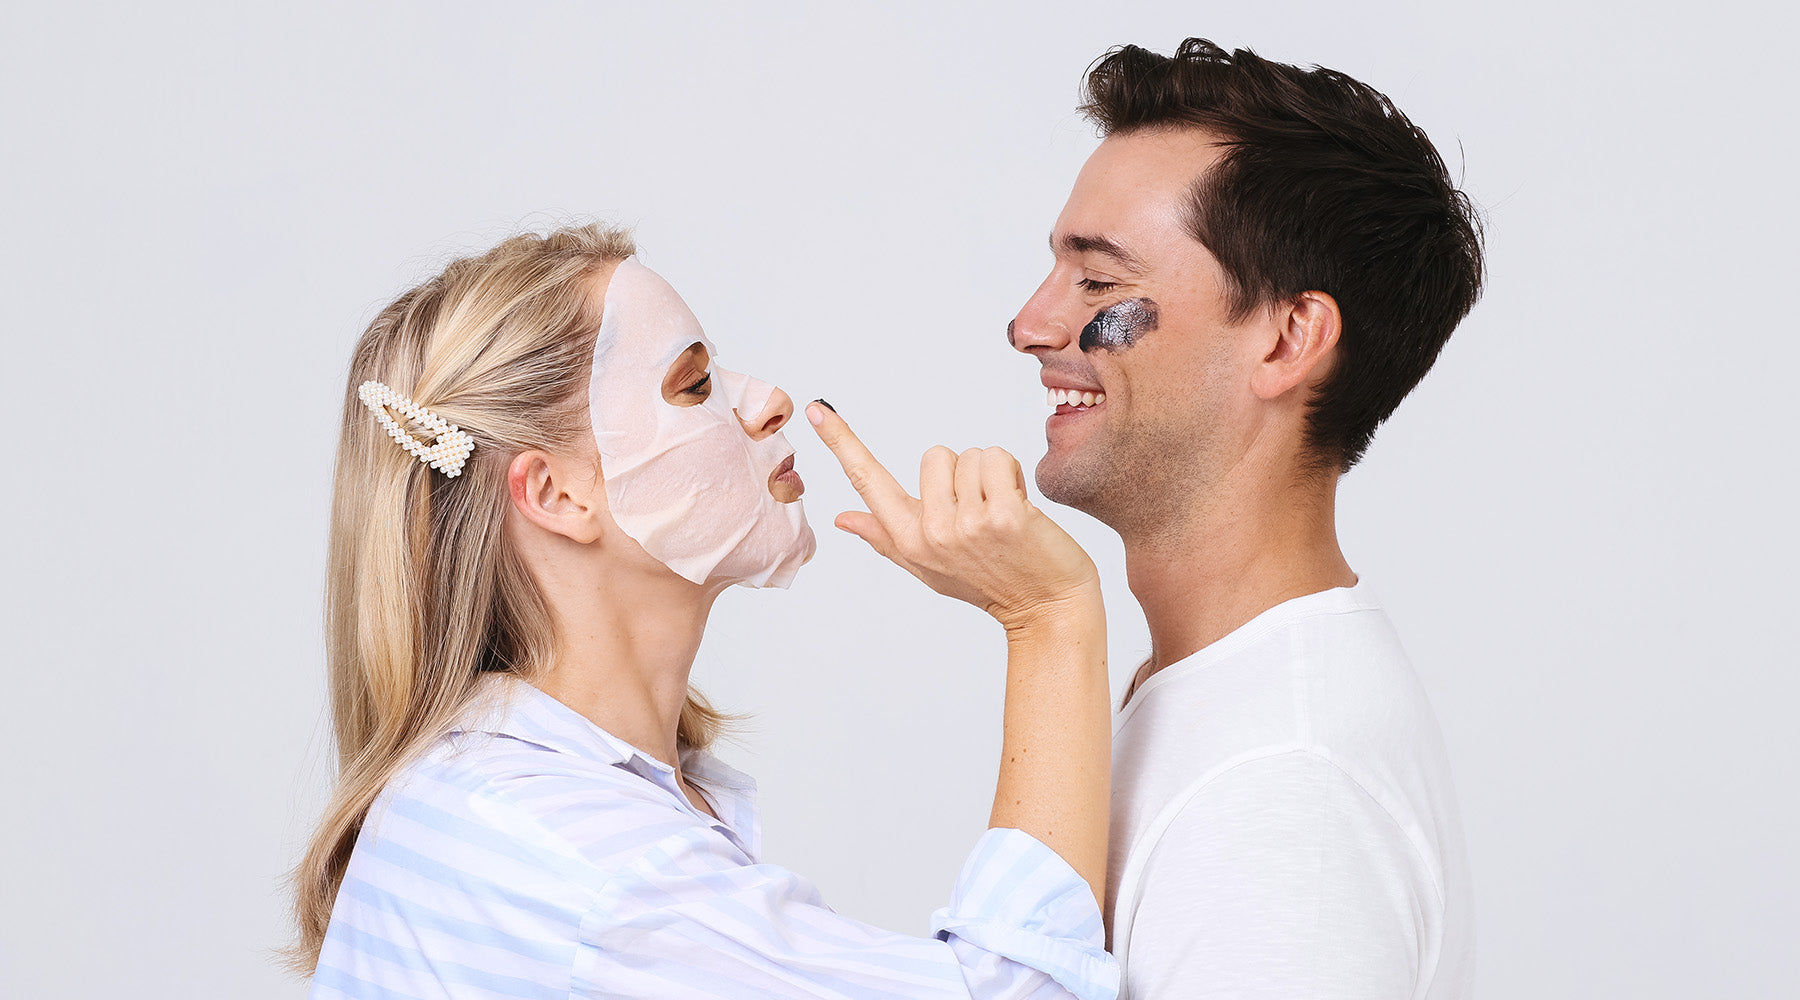 Getting Date Night Ready: His and Her Skin Care Routine